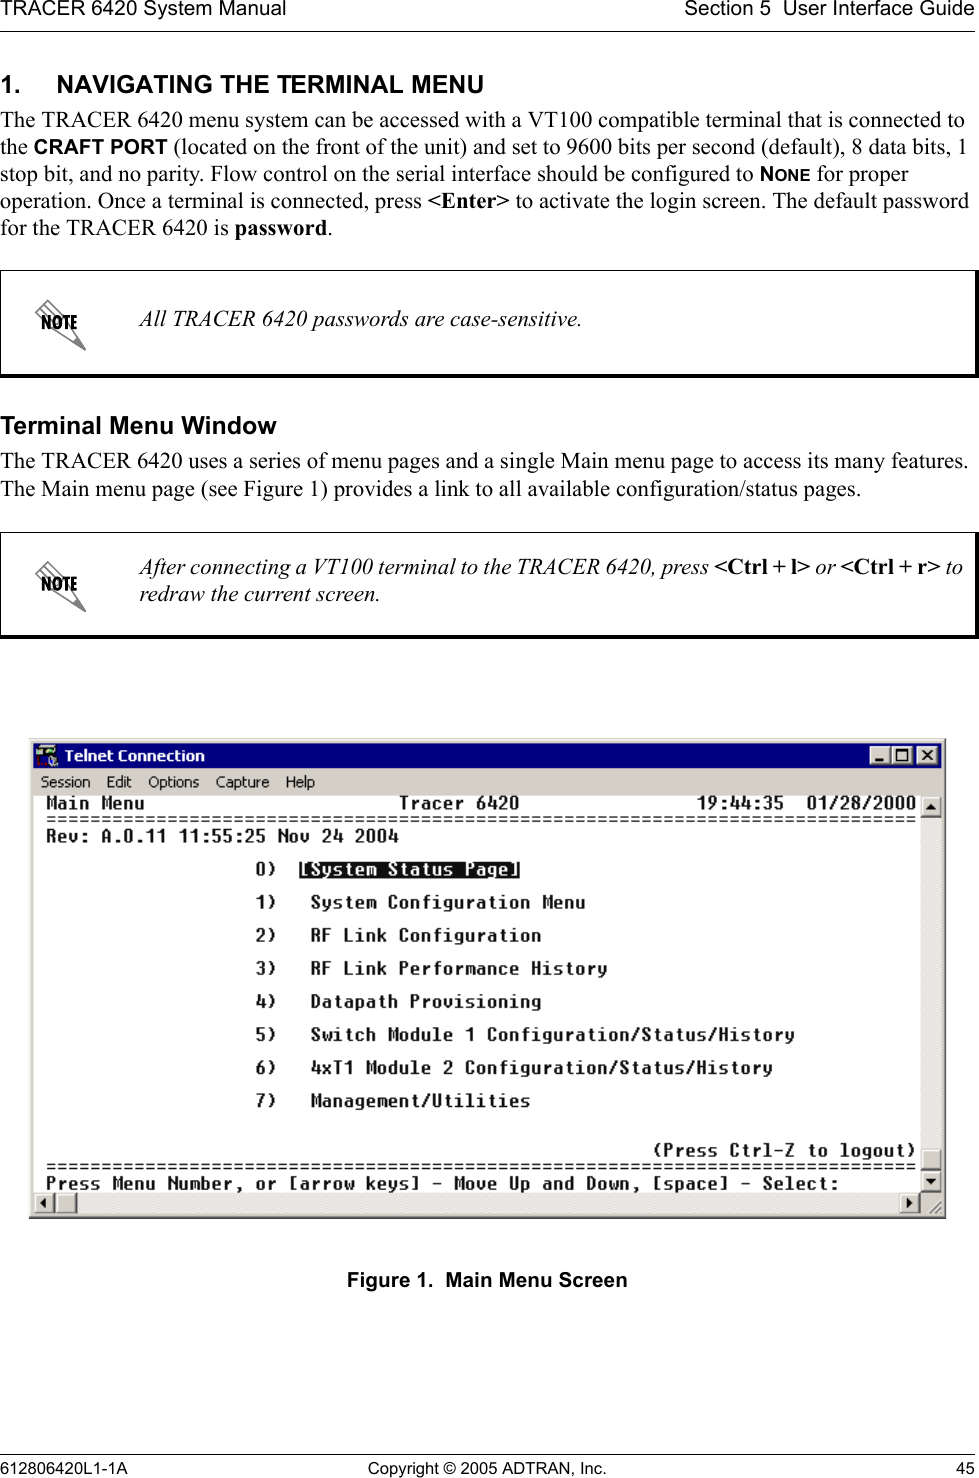 TRACER 6420 System Manual Section 5  User Interface Guide612806420L1-1A Copyright © 2005 ADTRAN, Inc. 451. NAVIGATING THE TERMINAL MENUThe TRACER 6420 menu system can be accessed with a VT100 compatible terminal that is connected to the CRAFT PORT (located on the front of the unit) and set to 9600 bits per second (default), 8 data bits, 1 stop bit, and no parity. Flow control on the serial interface should be configured to NONE for proper operation. Once a terminal is connected, press &lt;Enter&gt; to activate the login screen. The default password for the TRACER 6420 is password.Terminal Menu WindowThe TRACER 6420 uses a series of menu pages and a single Main menu page to access its many features. The Main menu page (see Figure 1) provides a link to all available configuration/status pages.Figure 1.  Main Menu ScreenAll TRACER 6420 passwords are case-sensitive.After connecting a VT100 terminal to the TRACER 6420, press &lt;Ctrl + l&gt; or &lt;Ctrl + r&gt; to redraw the current screen.